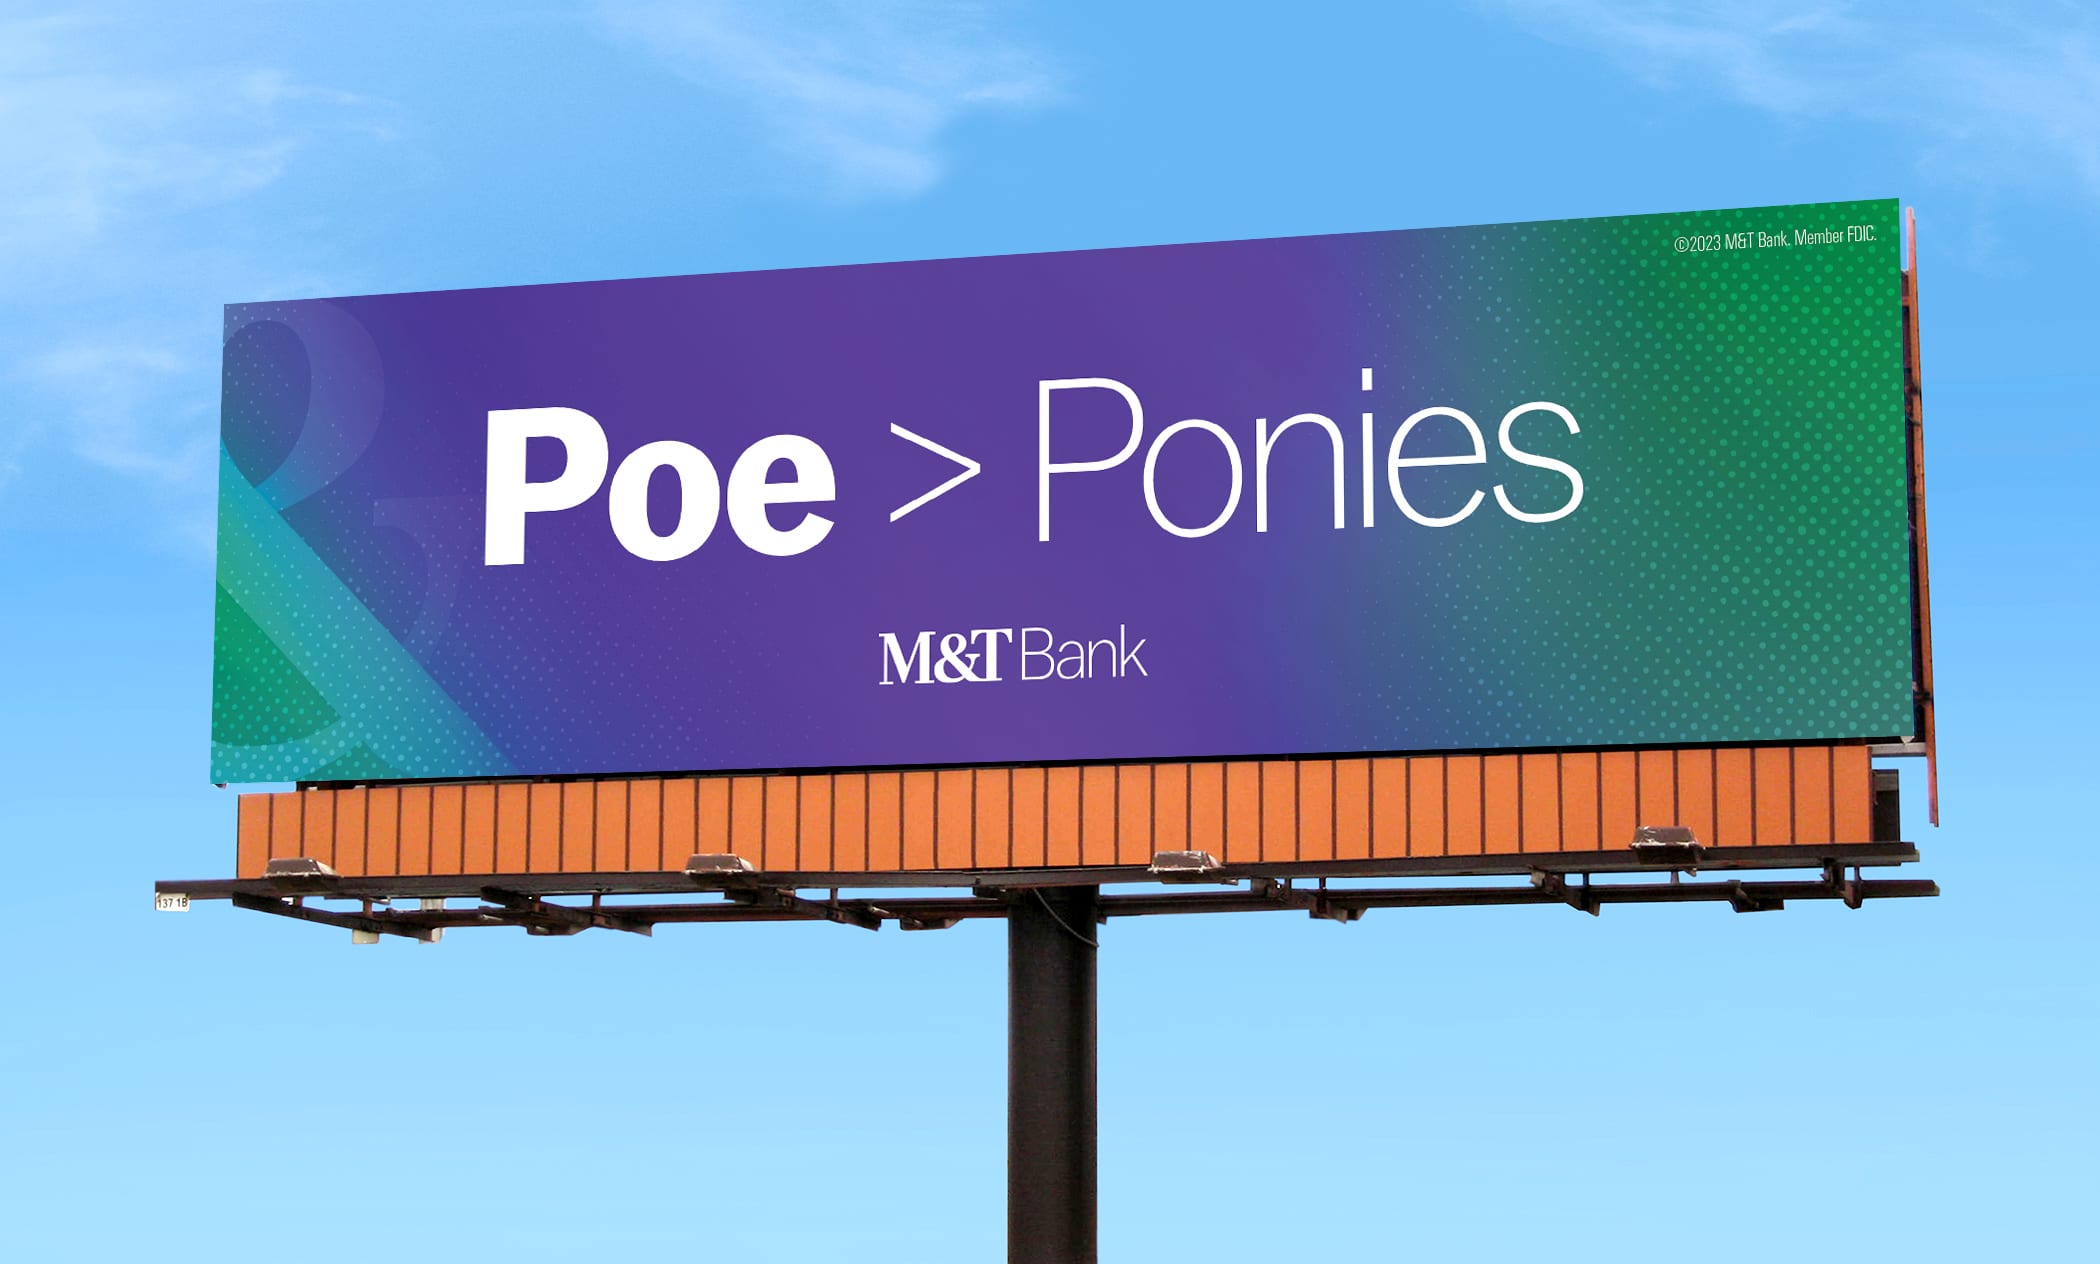 poe greater than ponies